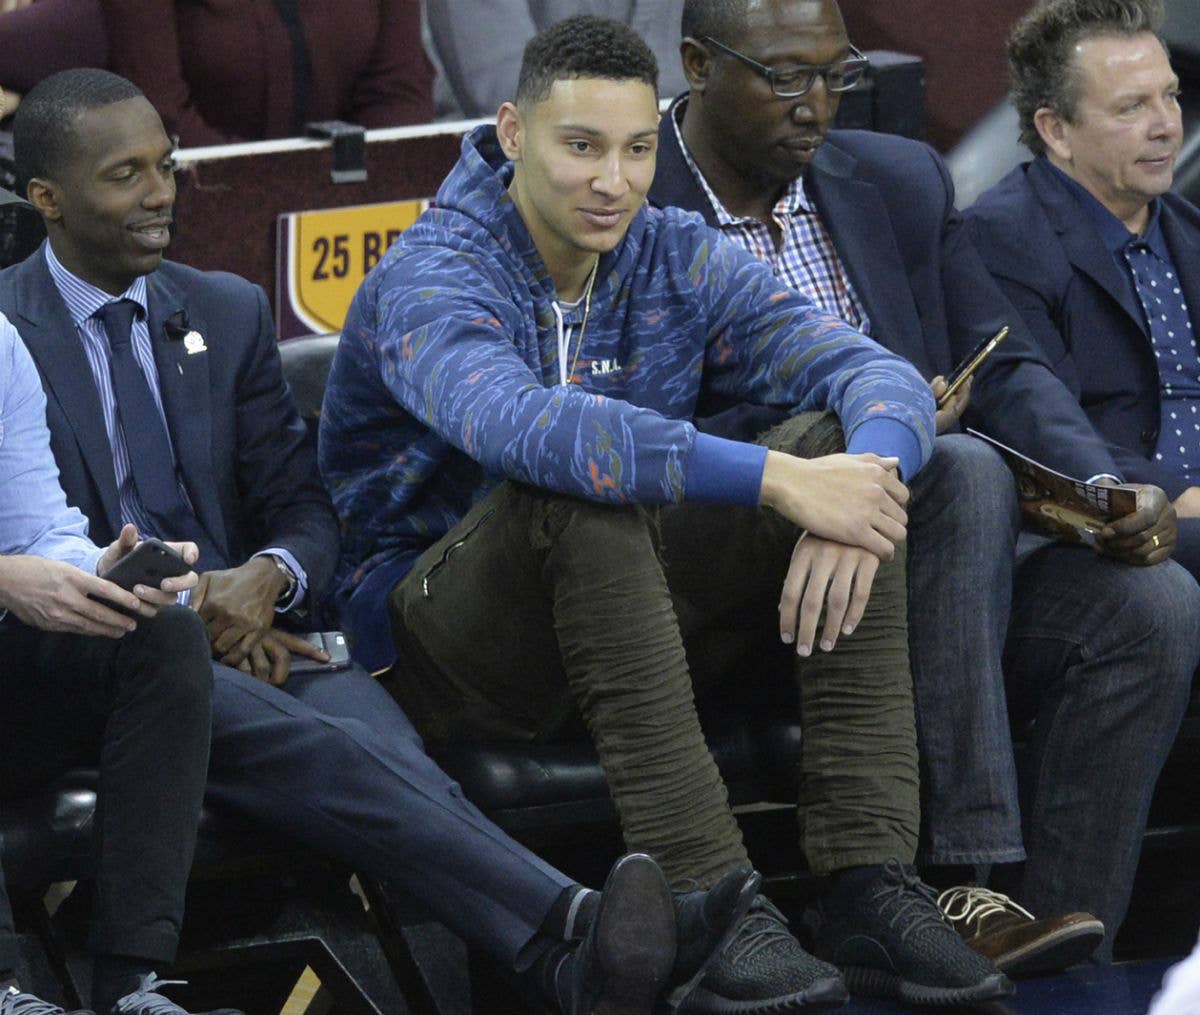 Ben Simmons Wearing the "Pirate Black" adidas Yeezy 350 Boost